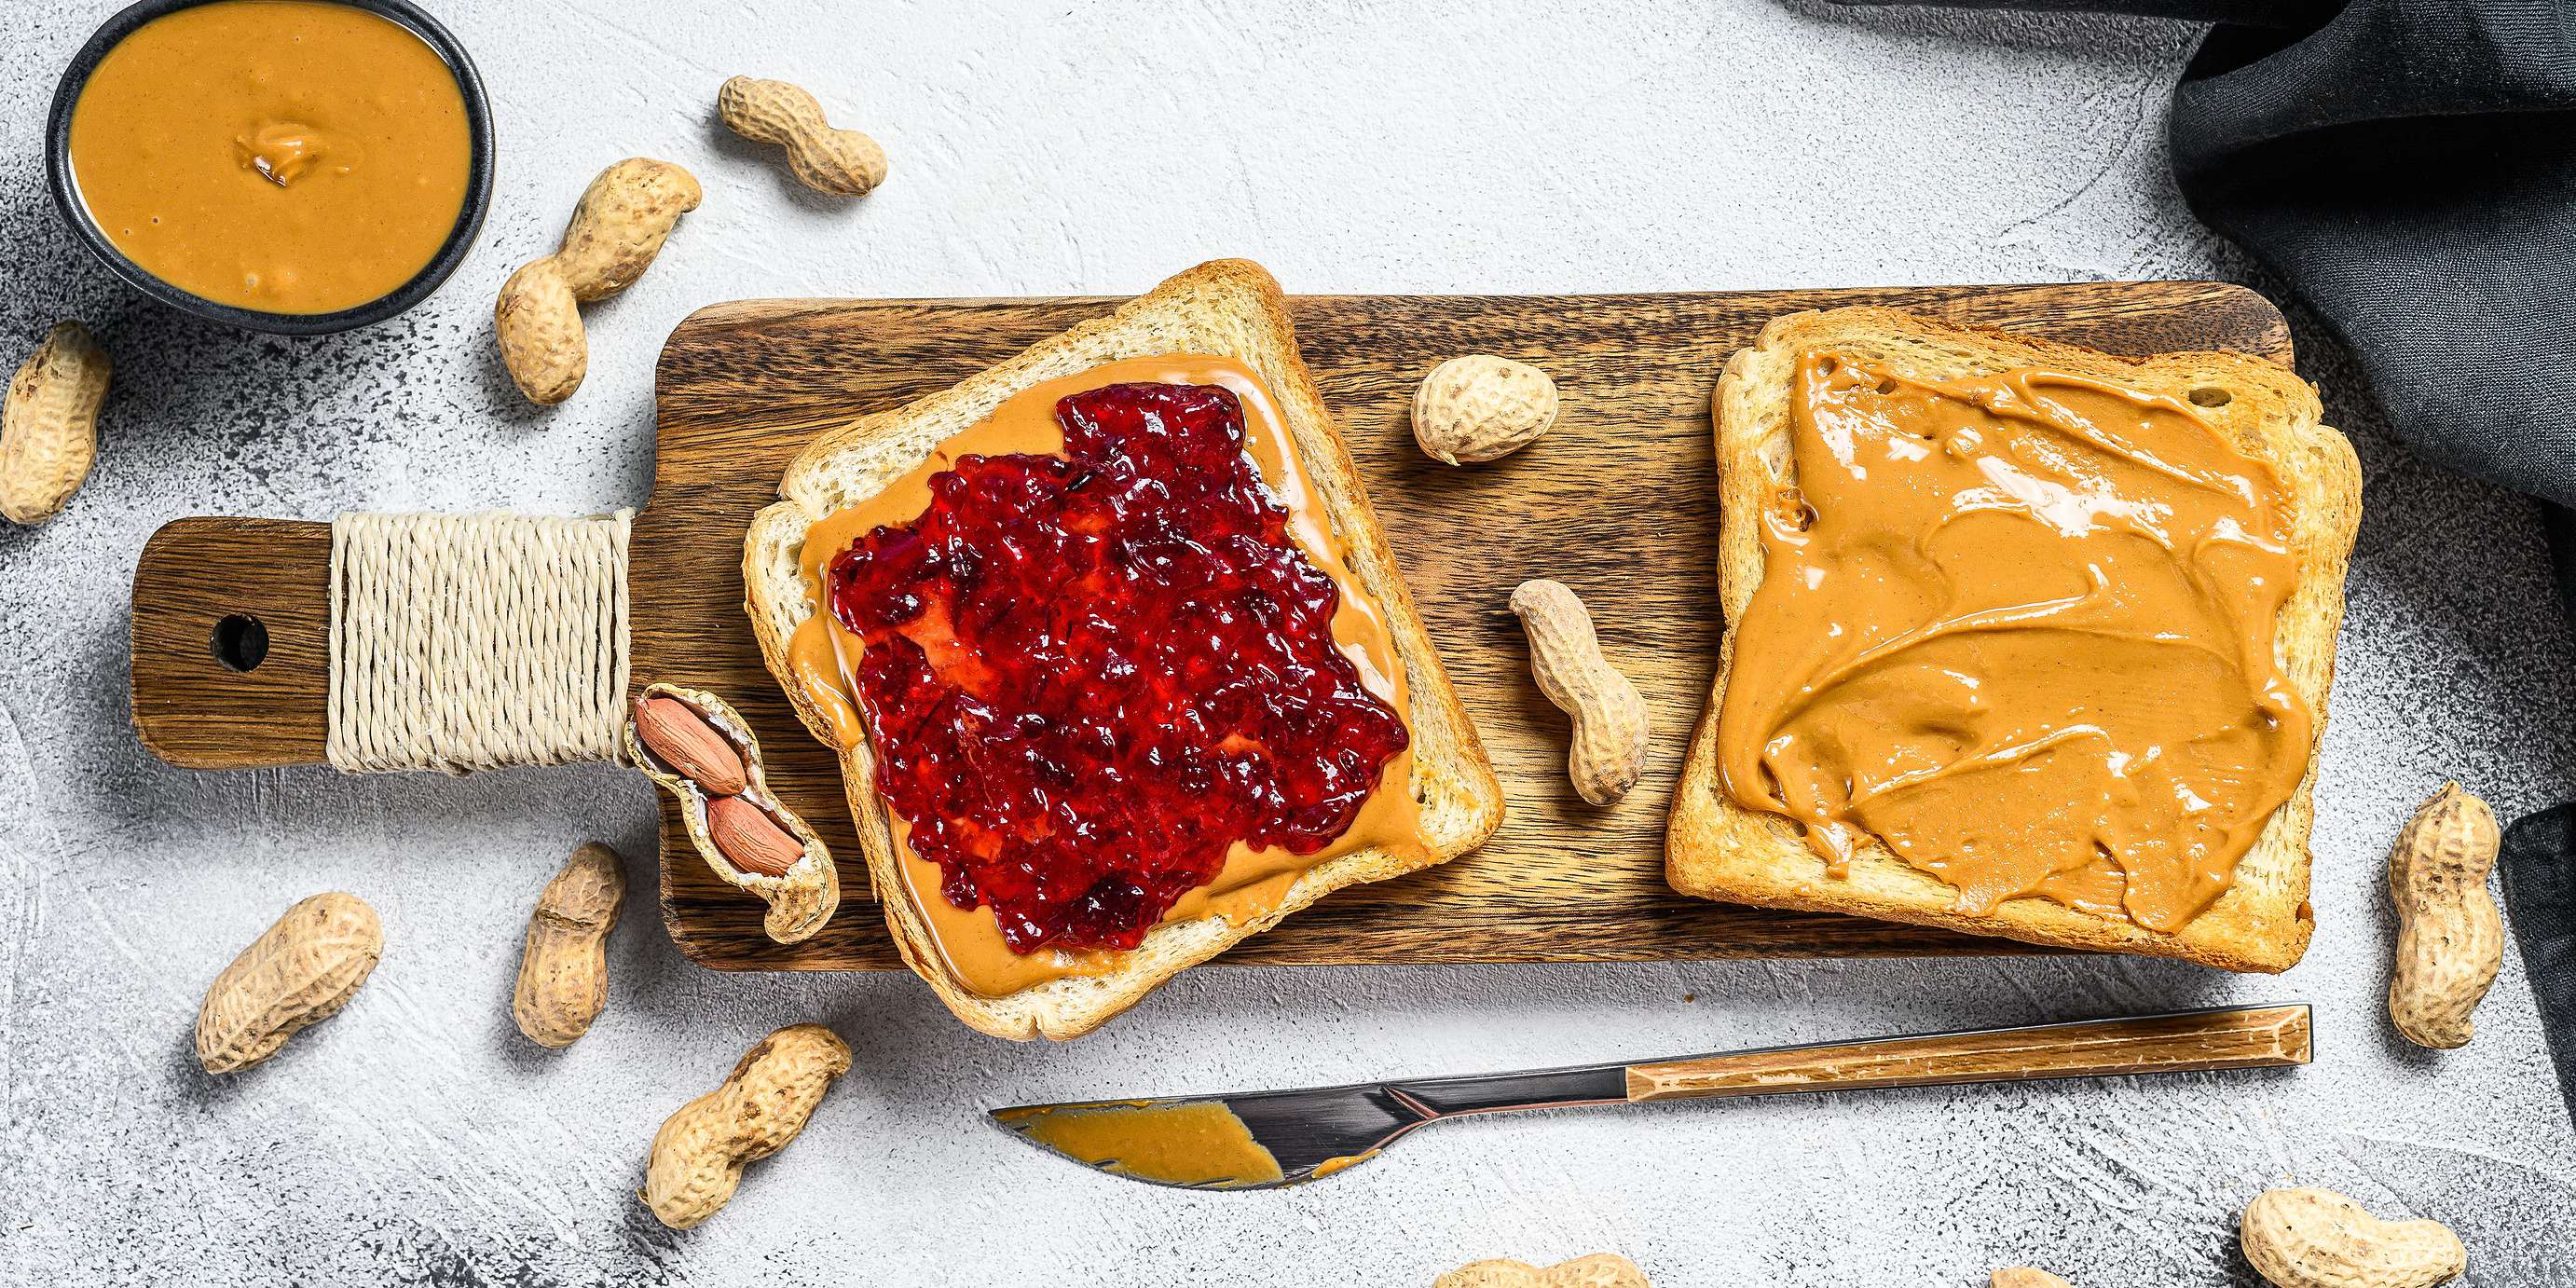 Traditional Peanut Butter and Jelly Sandwich